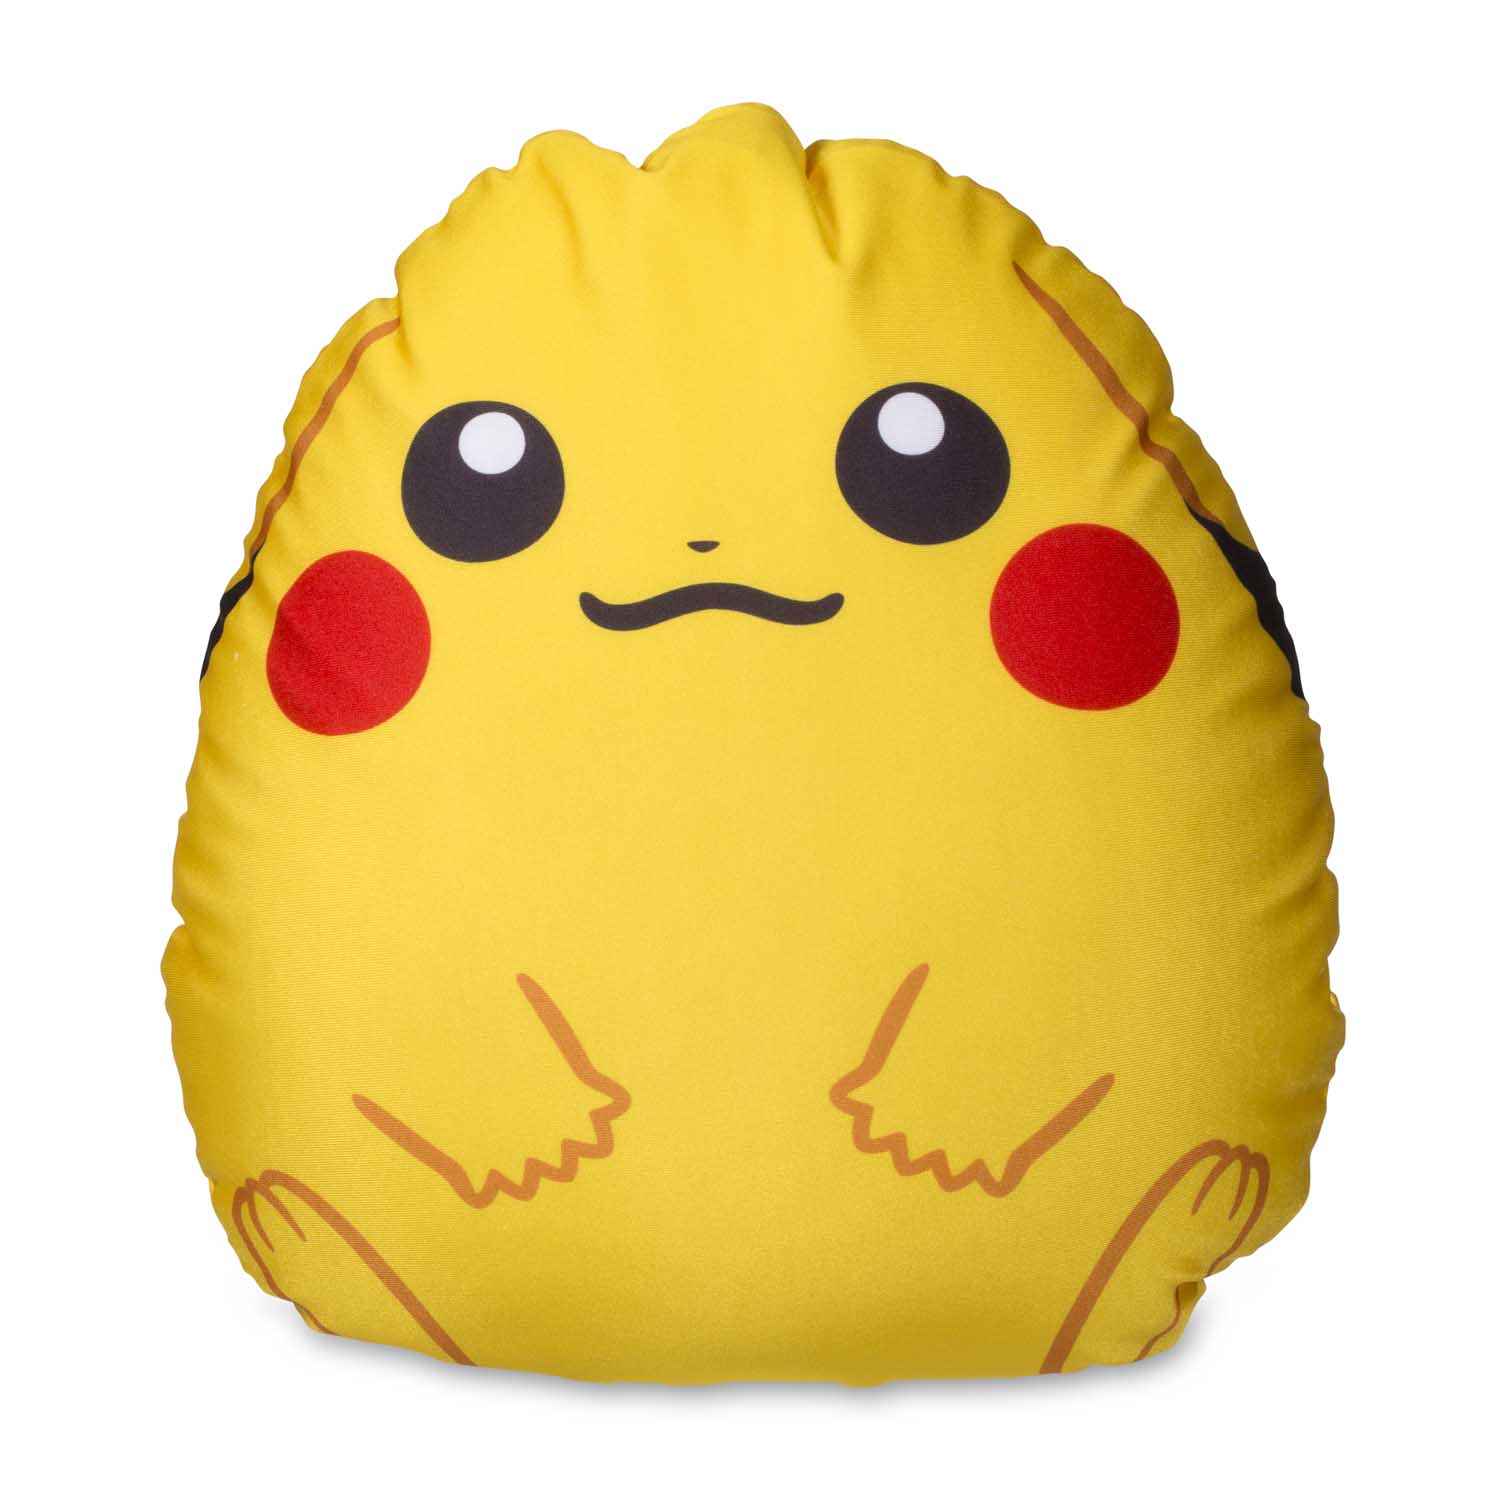 Pikachu Egg Shaped Cushion Bead Filling Stands Up